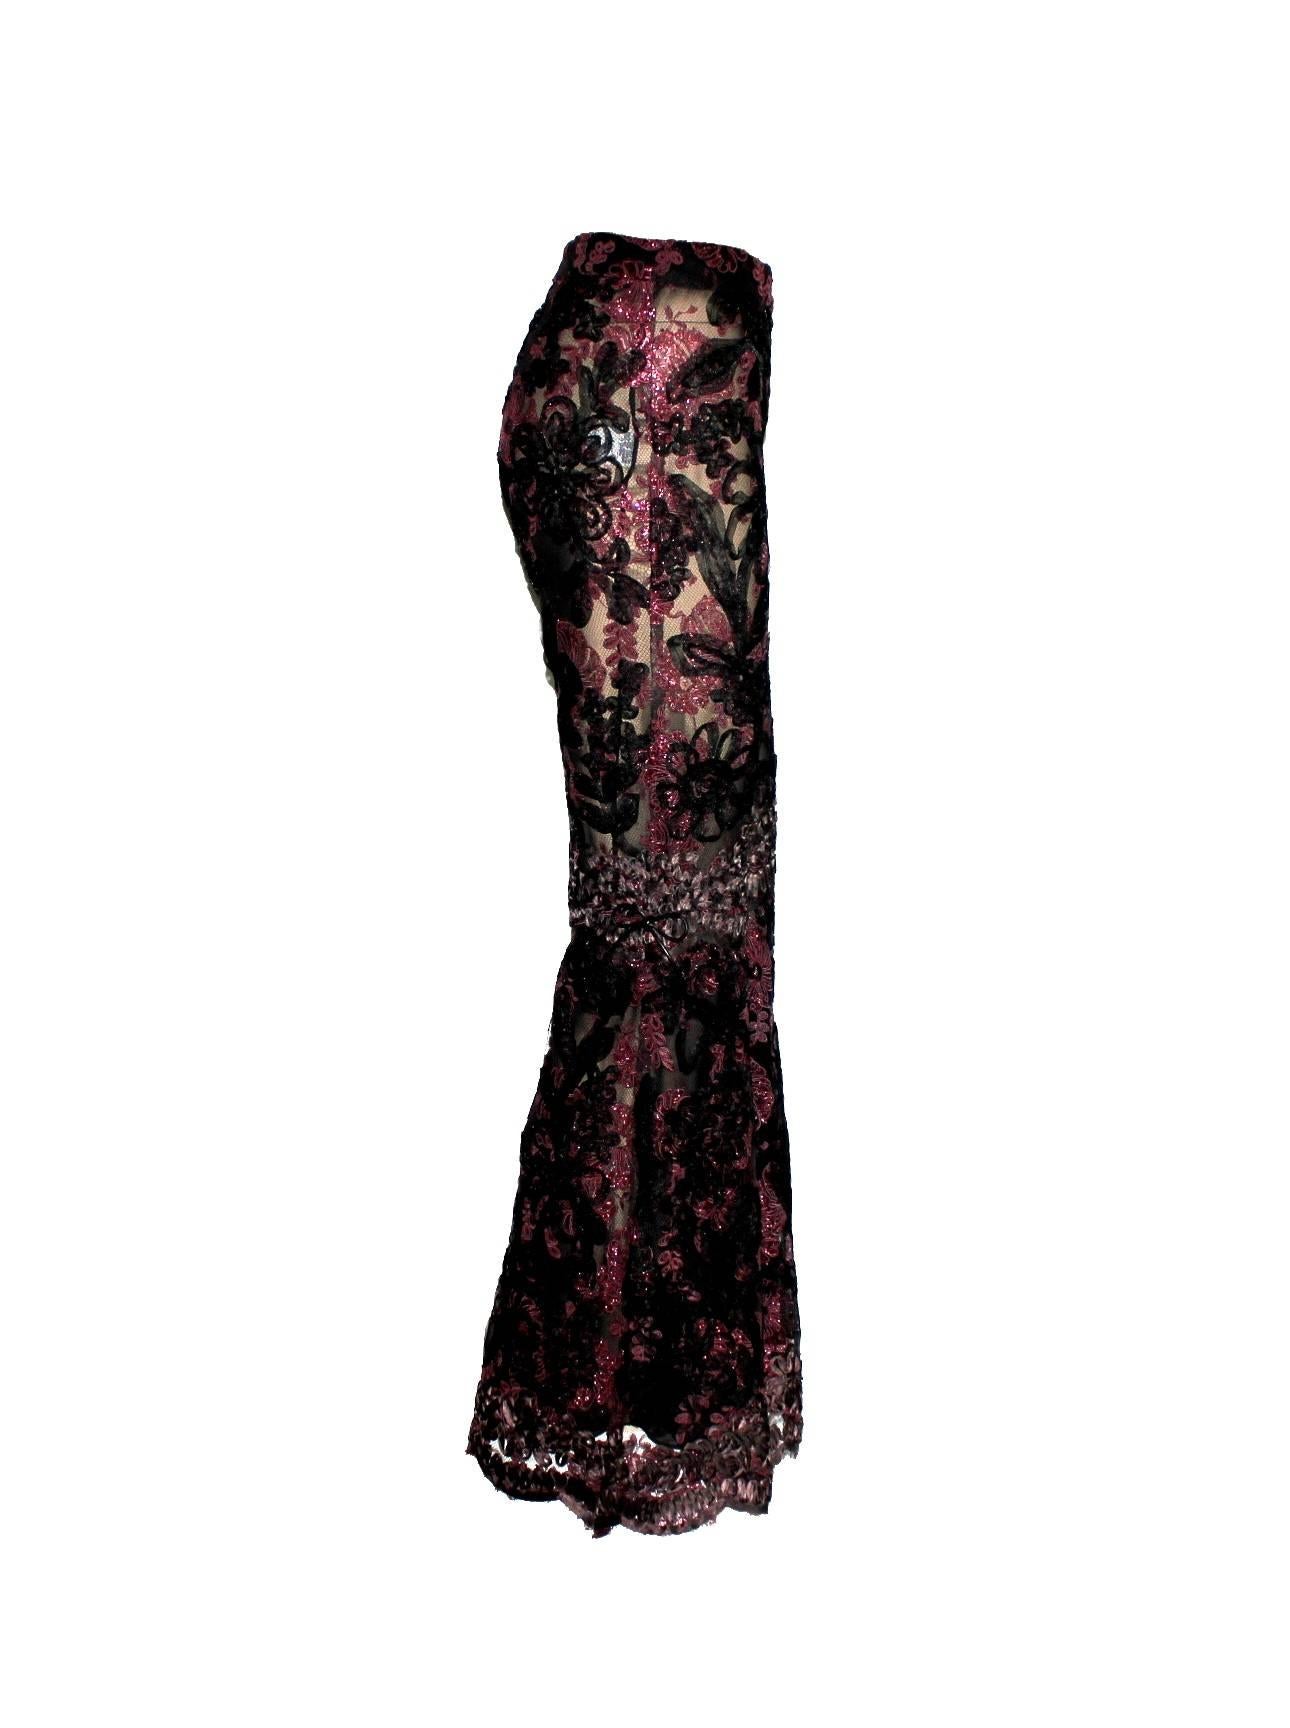 RARE COLLECTOR'S ITEM

GORGEOUS PURPLE EMBROIDERED LACE PANTS
BY TOM FORD FOR HIS FW 1999 COLLECTION FOR GUCCI

FALL WINTER 1999

IT WAS FEATURED IN THE GUCCI RUNWAY SHOW AS WELL AS IN THE AD CAMPAIGN

 A PIECE OF FASHION HISTORY - THESE